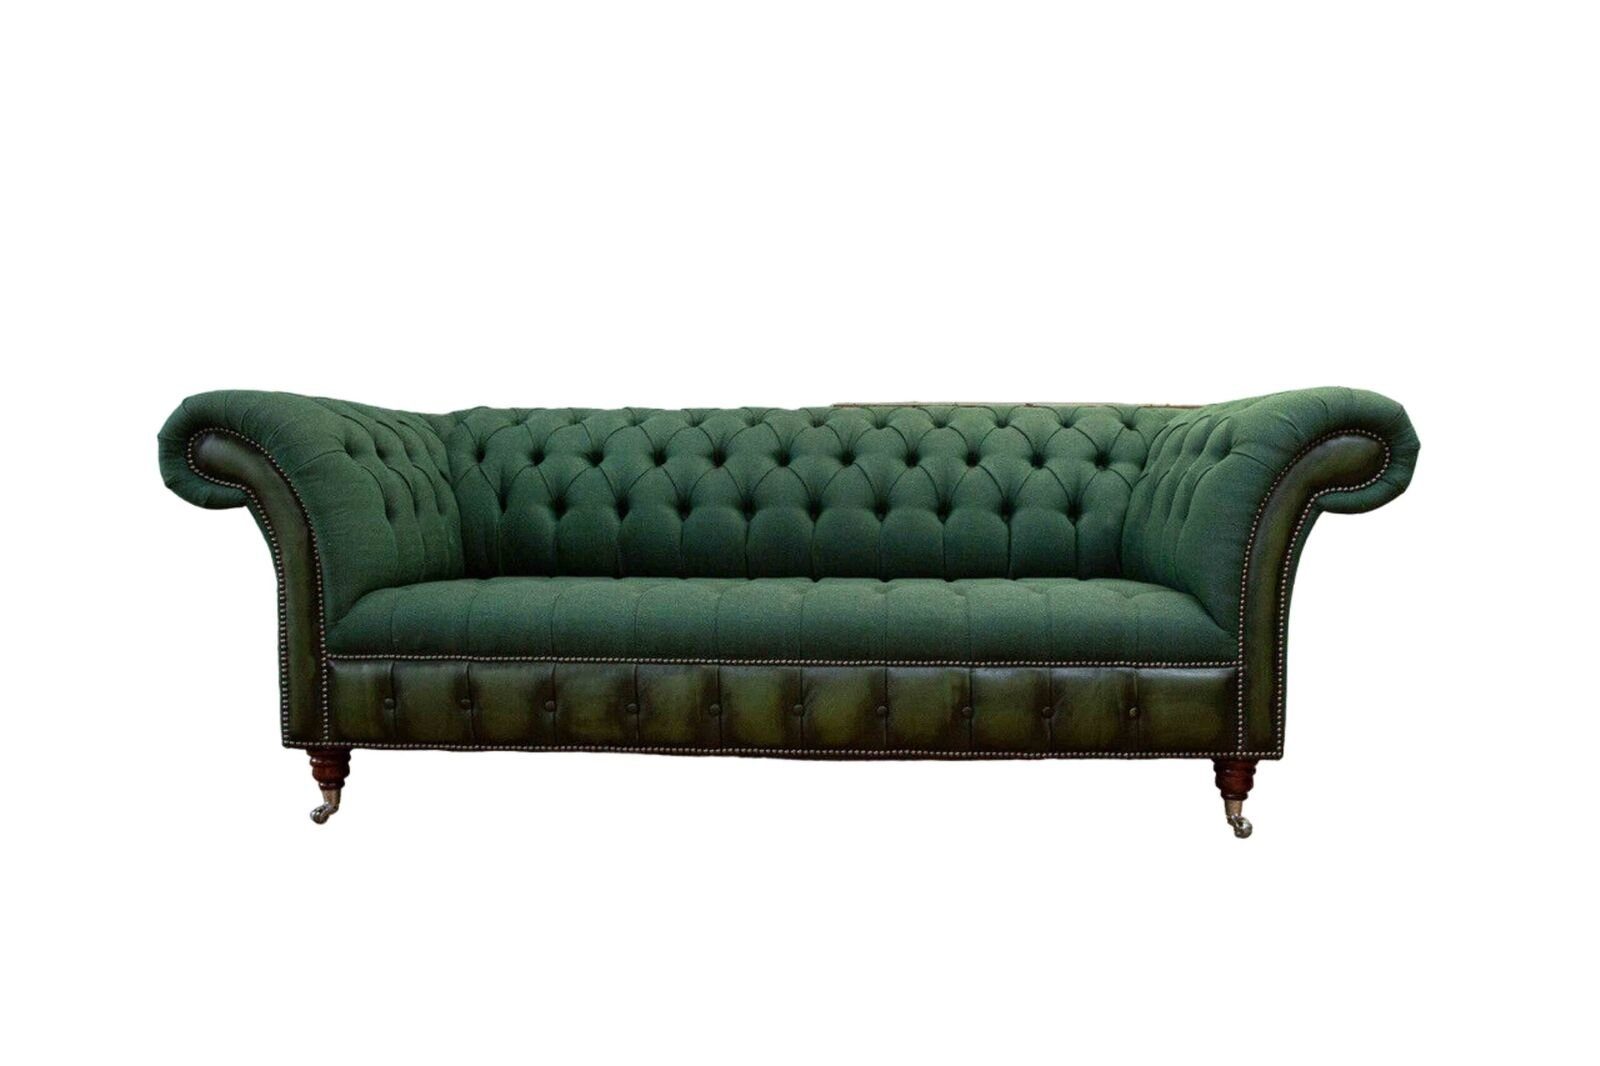 JVmoebel Sofa Grünes Chesterfield Sofa 3 Sitzer Couch Polster Stoff Leder Couchen, Made in Europe